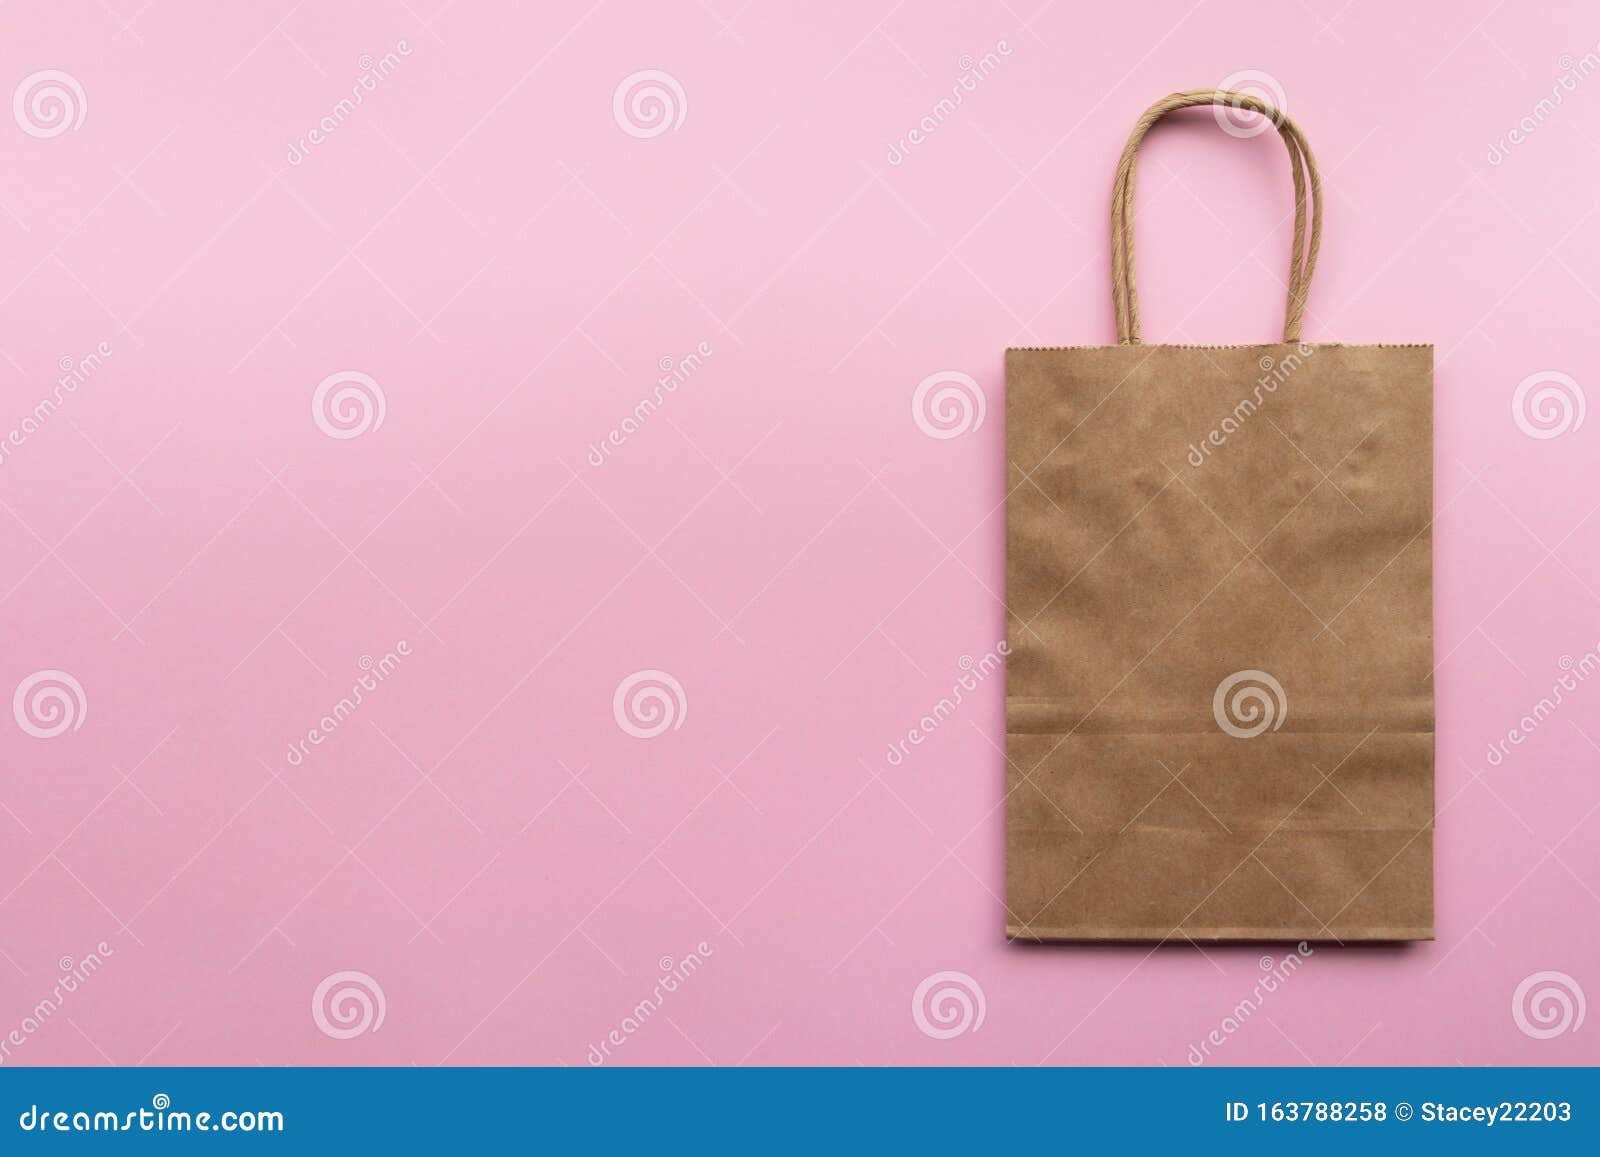 Download Plain Blank Brown Paper Bag On A Pink Background Right ...